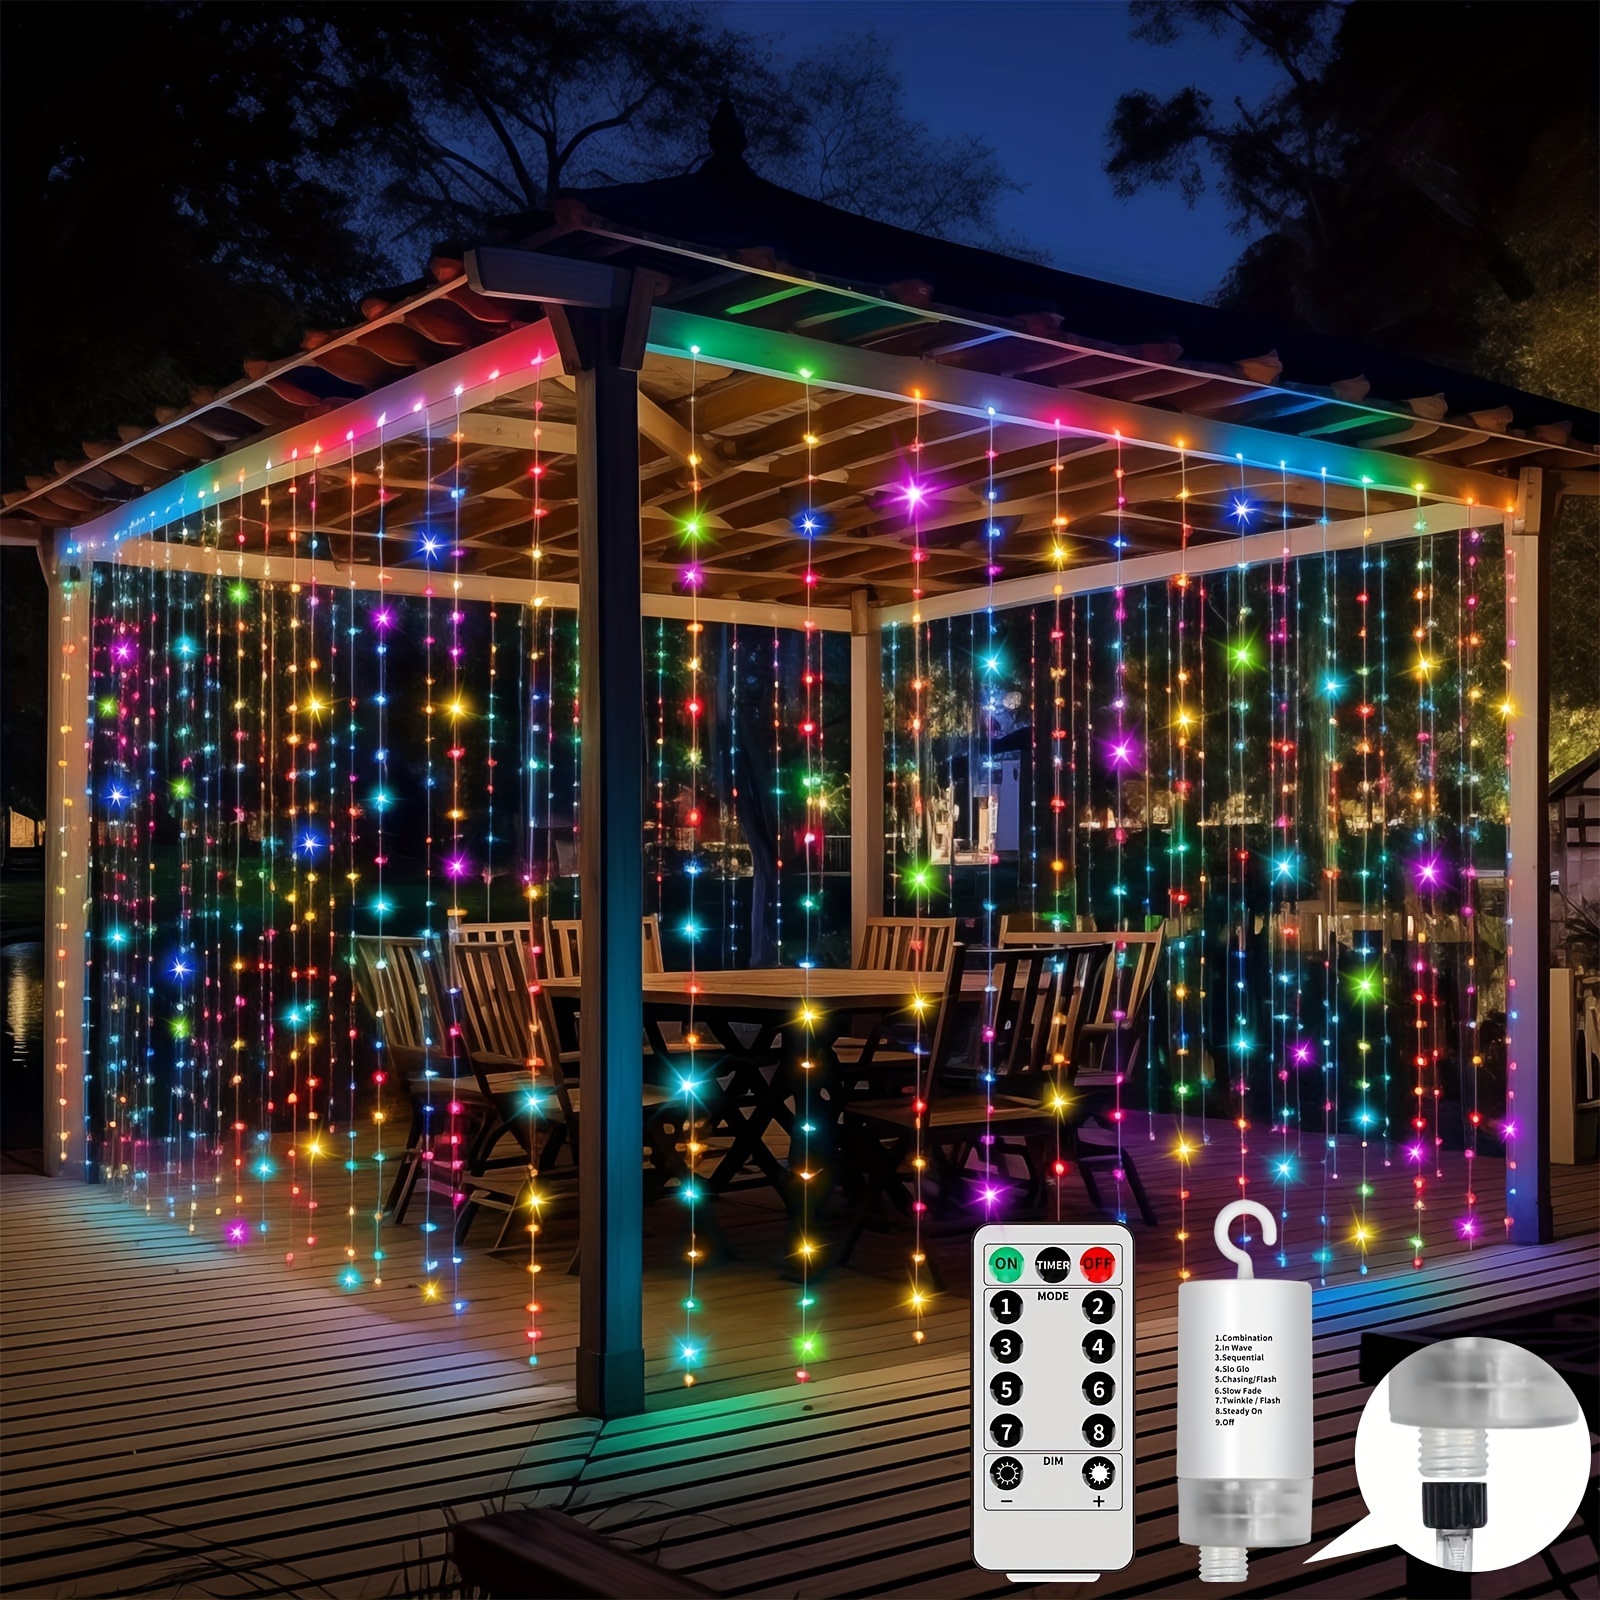 

Upgraded 300led Curtain Lights Battery Operated Outdoor Waterproof, 10ftx10ft Twinkle Hanging Waterfall Lights With Remote Control 8 Mode Dimmable String Fairy Lights For Bedroom Porch Gazebo